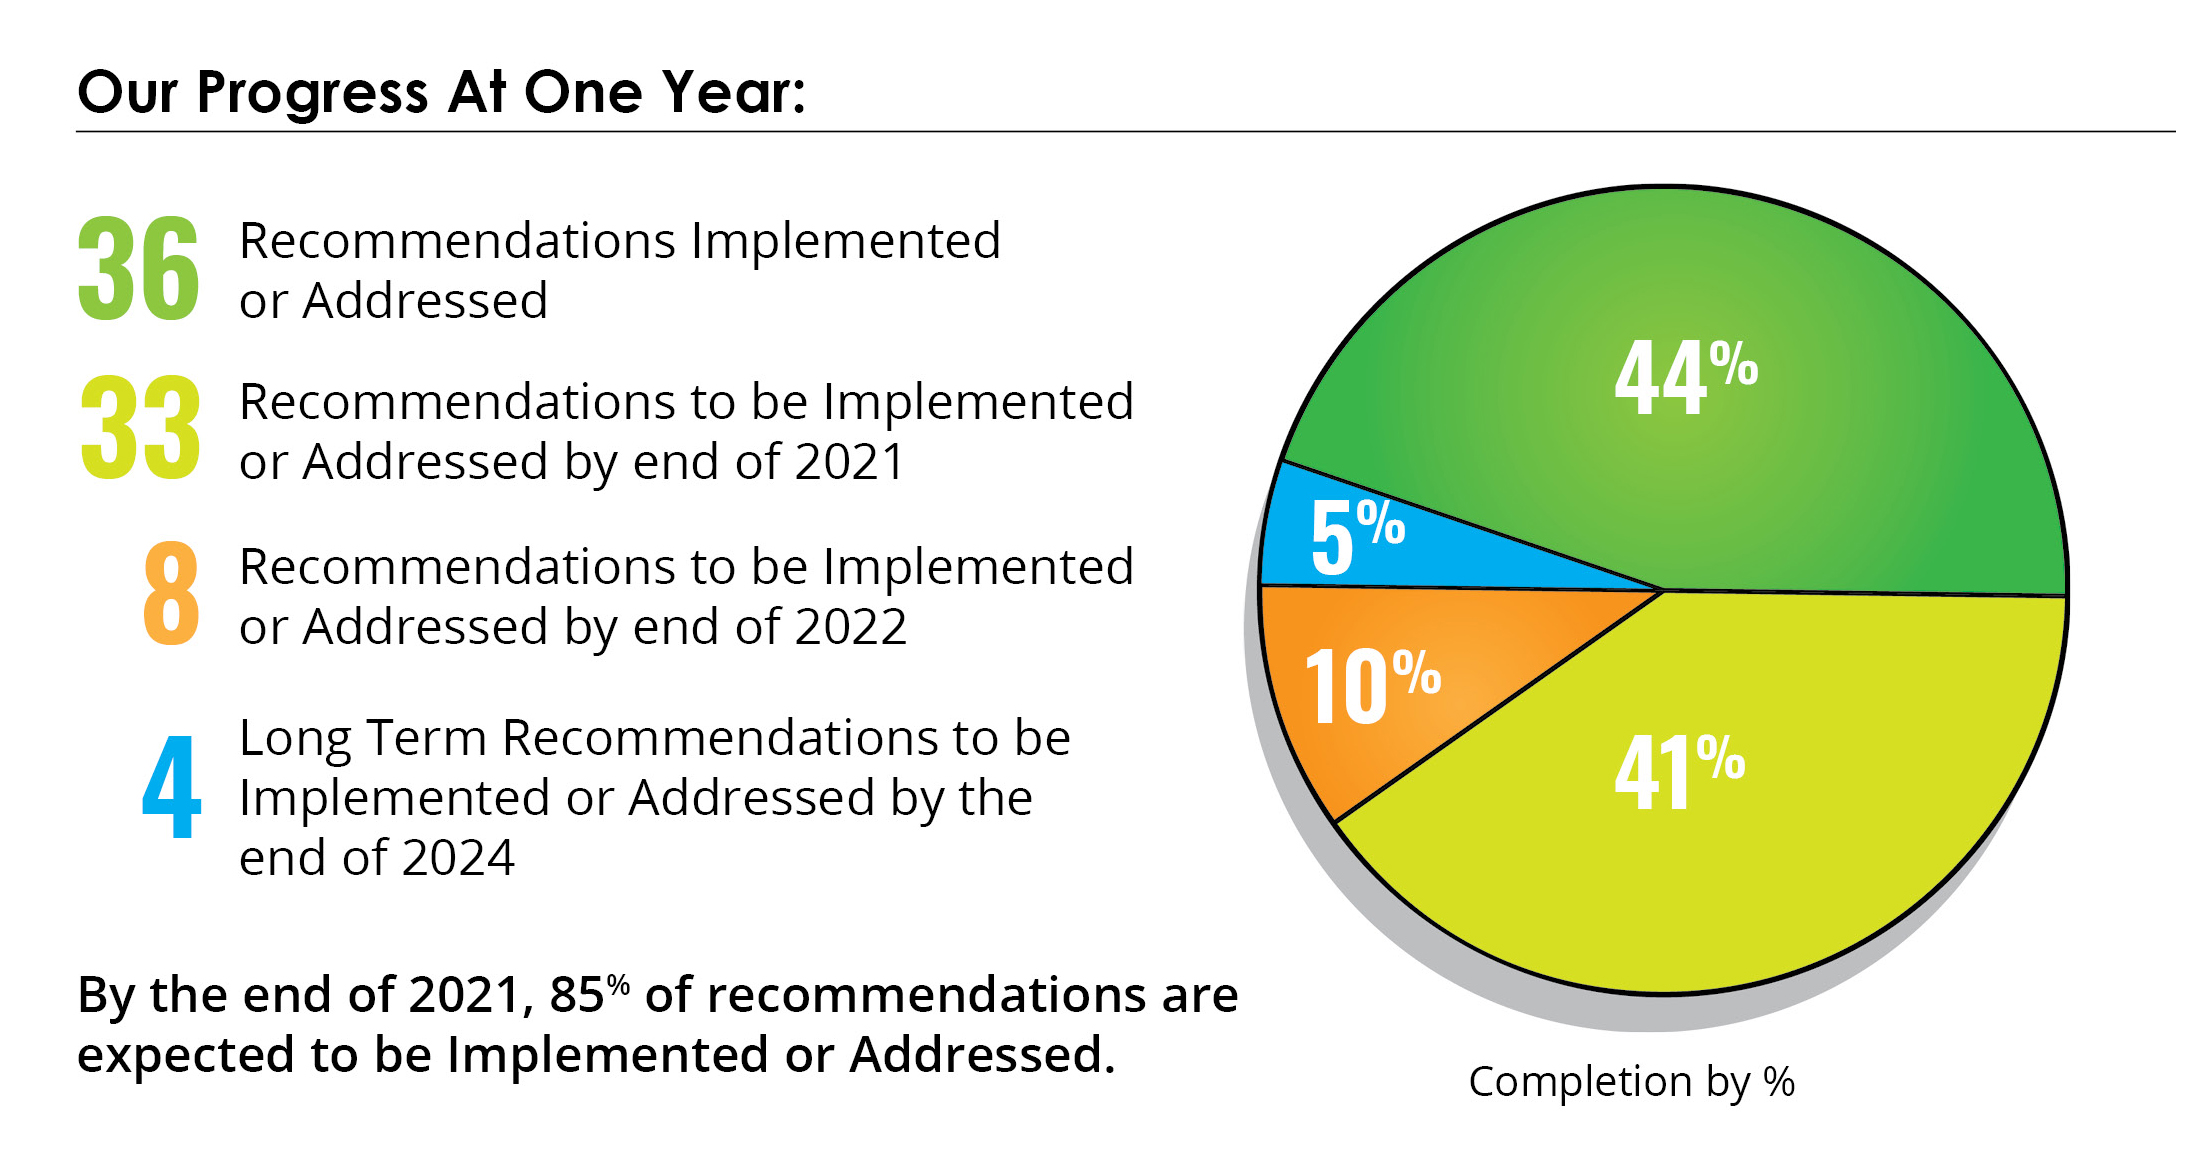 Our progress at one year pie chart: 36 recommendations implemented or addressed (44%); 33 recommendations to be implemented or addressed by end of 2021 (41%); 8 recommendations to be implemented or addressed by end of 2022 (10%); 4 long term recommendations to be implemented or addressed by end of 2024 (5%)